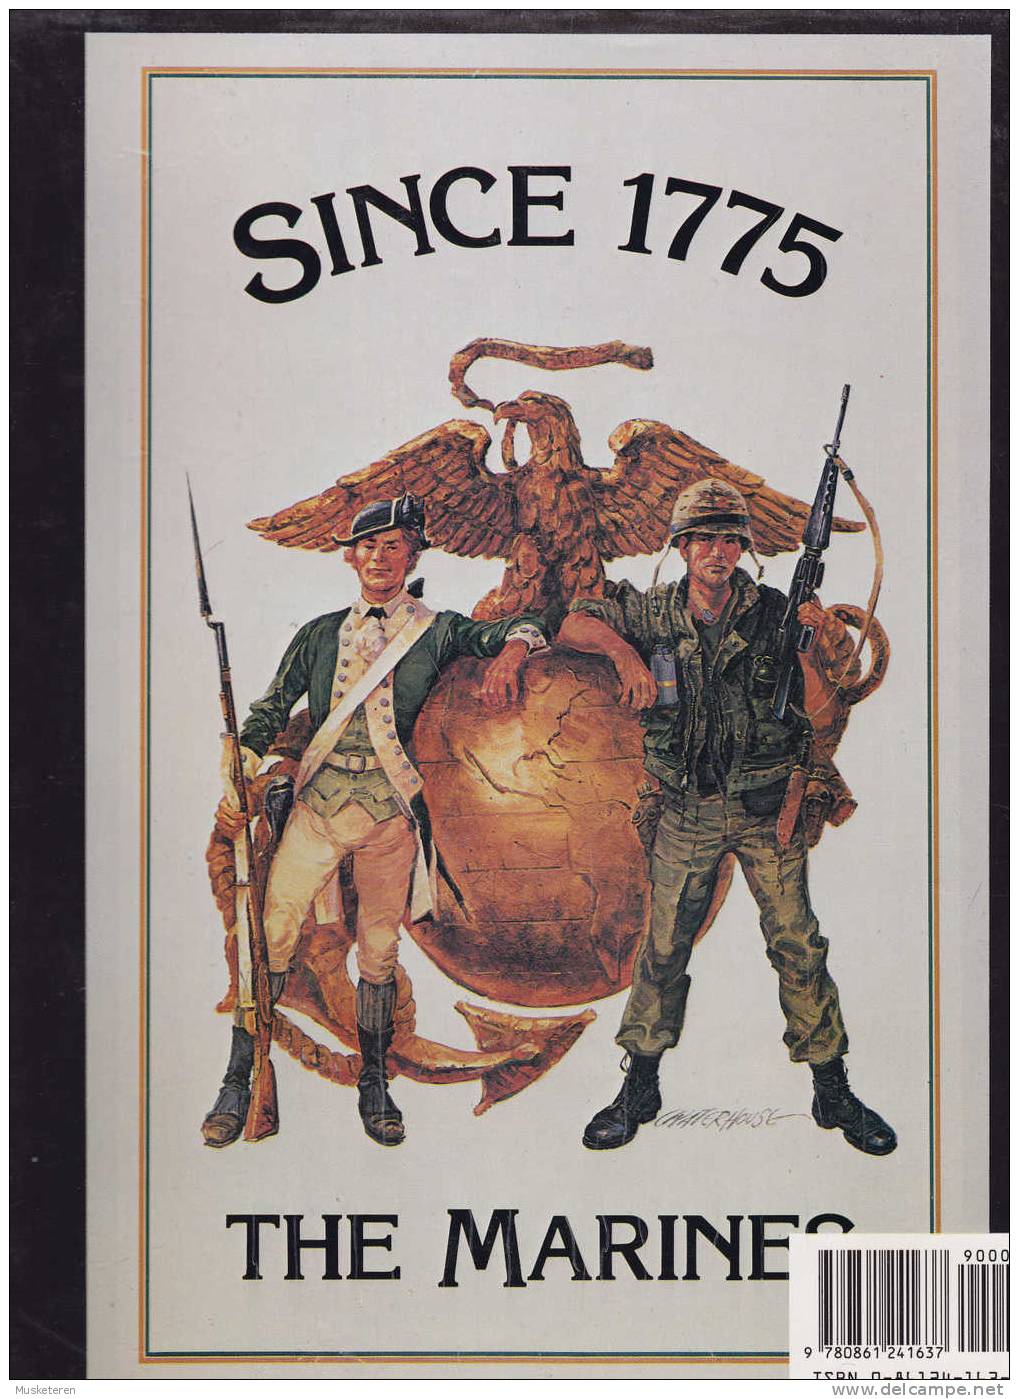 History Of The US MARINES By Jack Murphy - Forces Armées Américaines